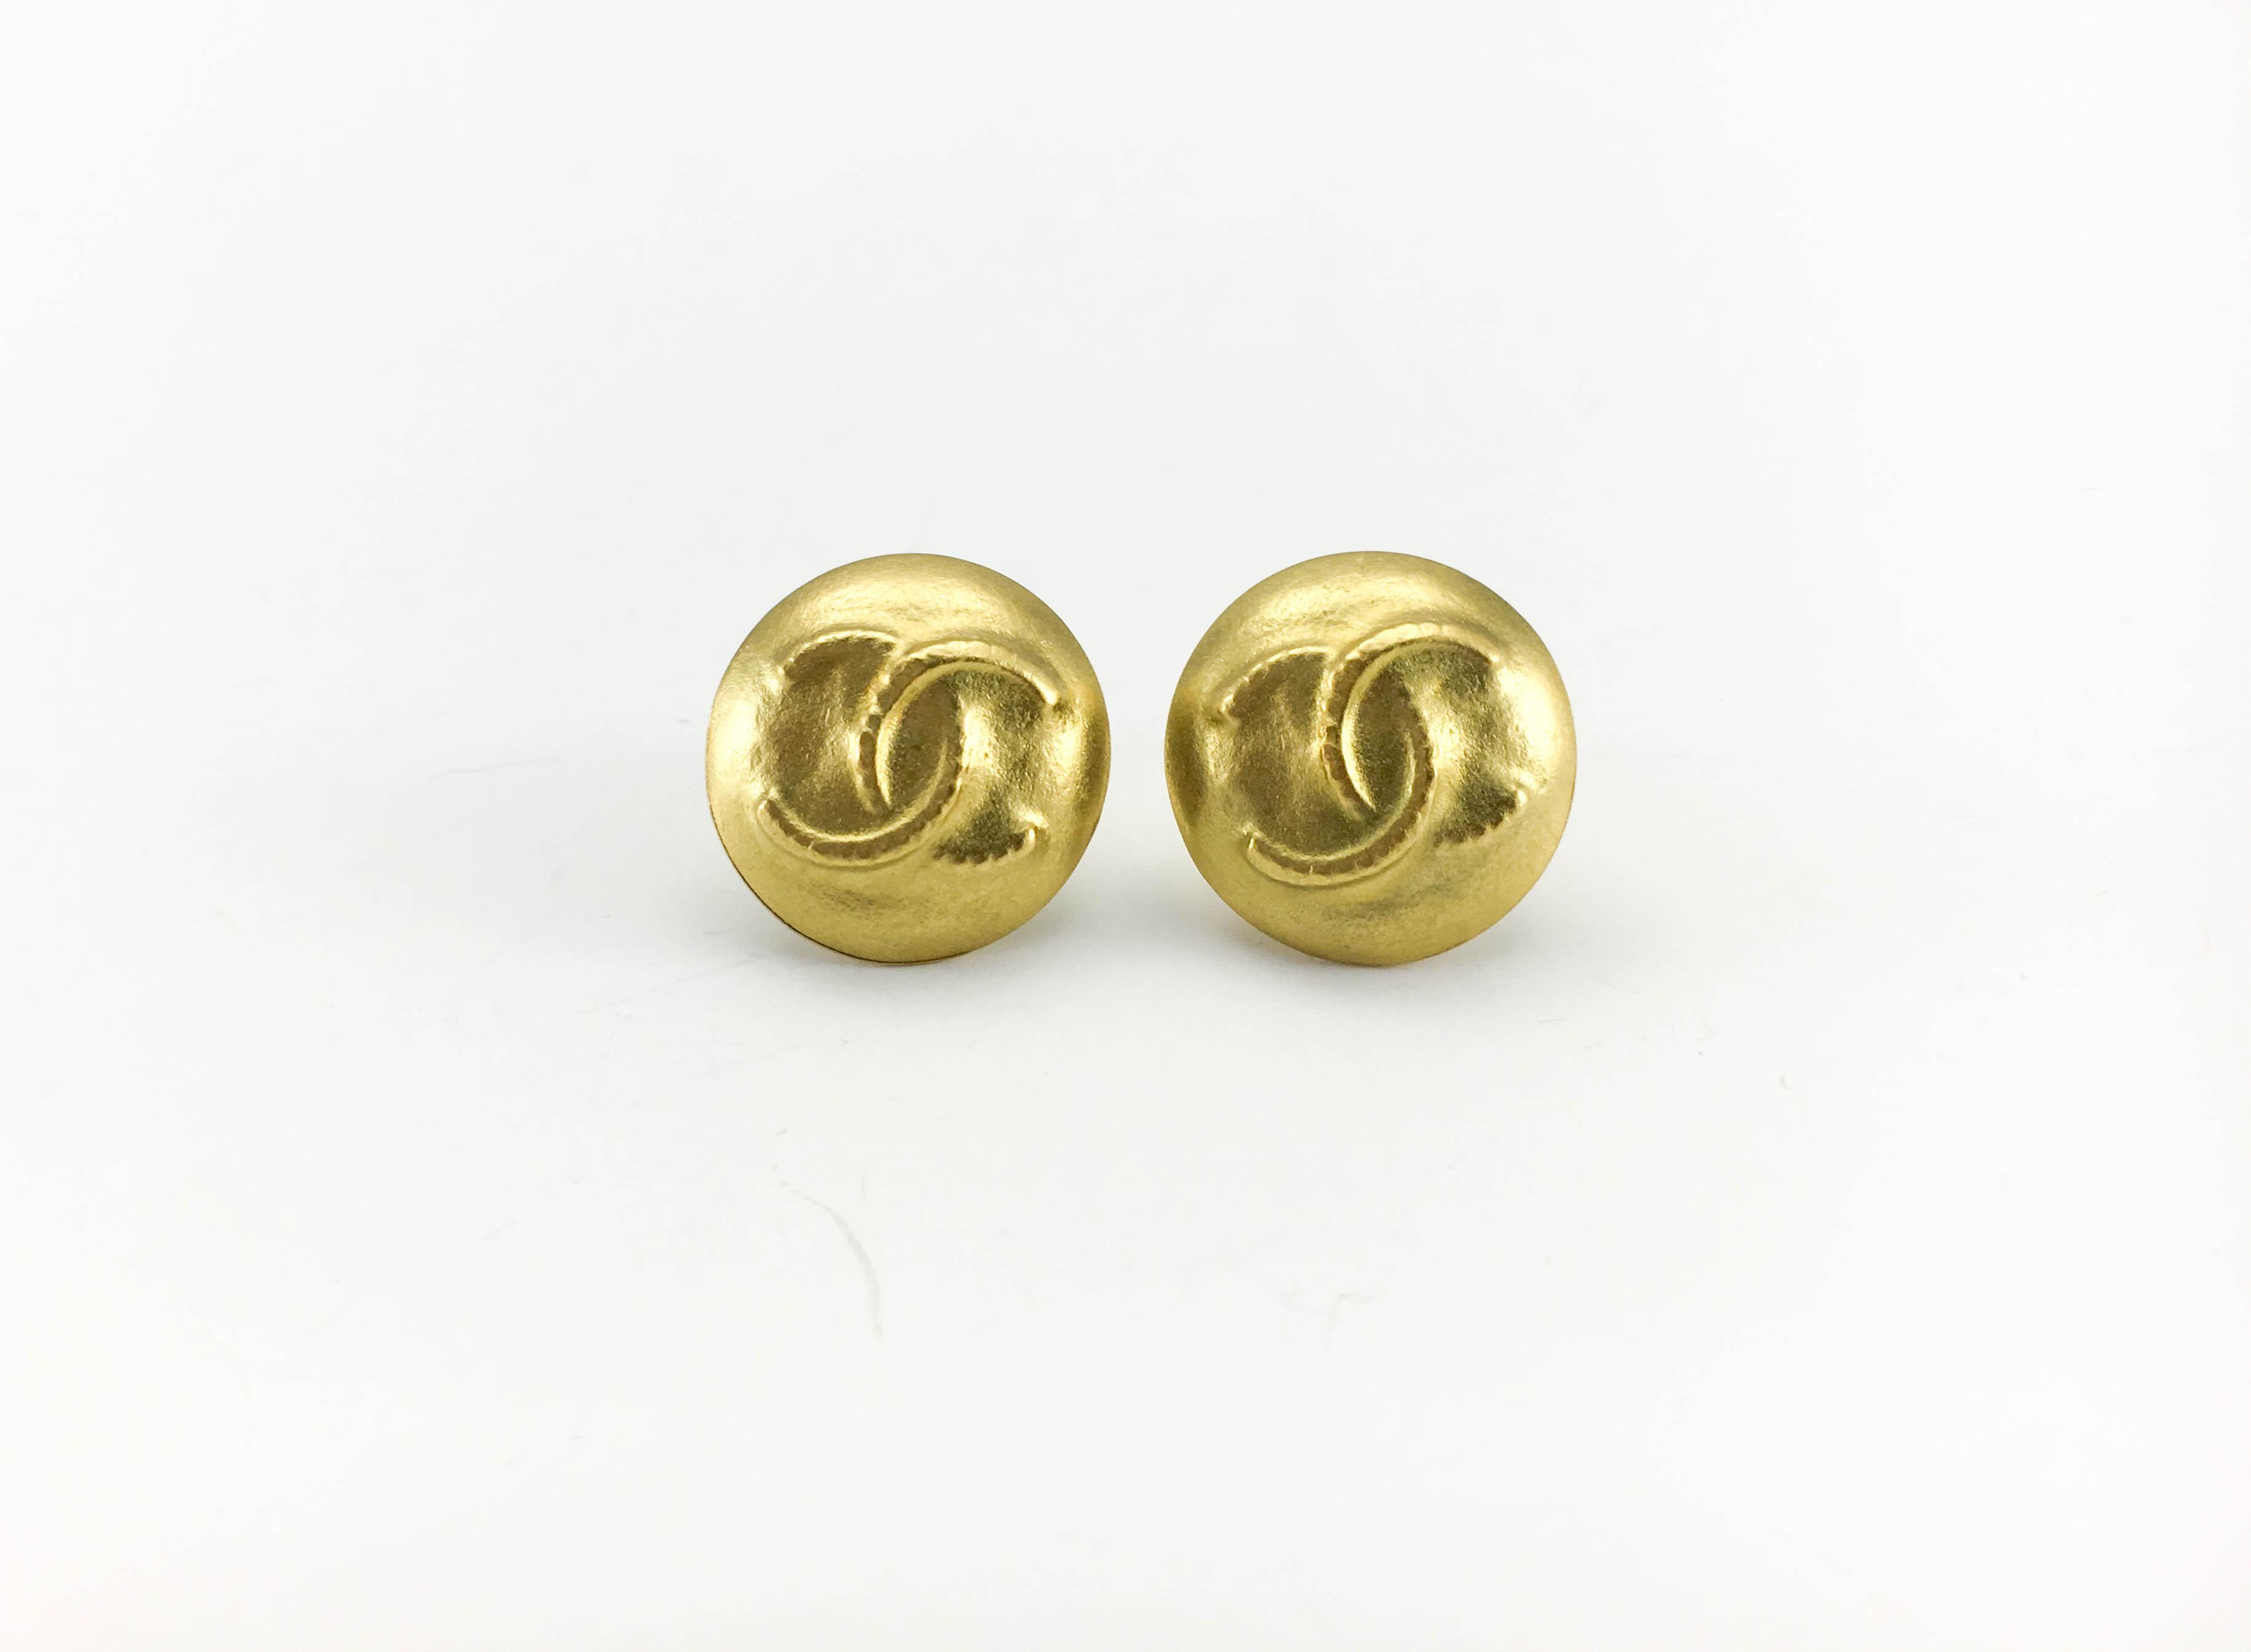 1995 Chanel Matte Gold-Plated Round Logo Earrings In Excellent Condition In London, Chelsea